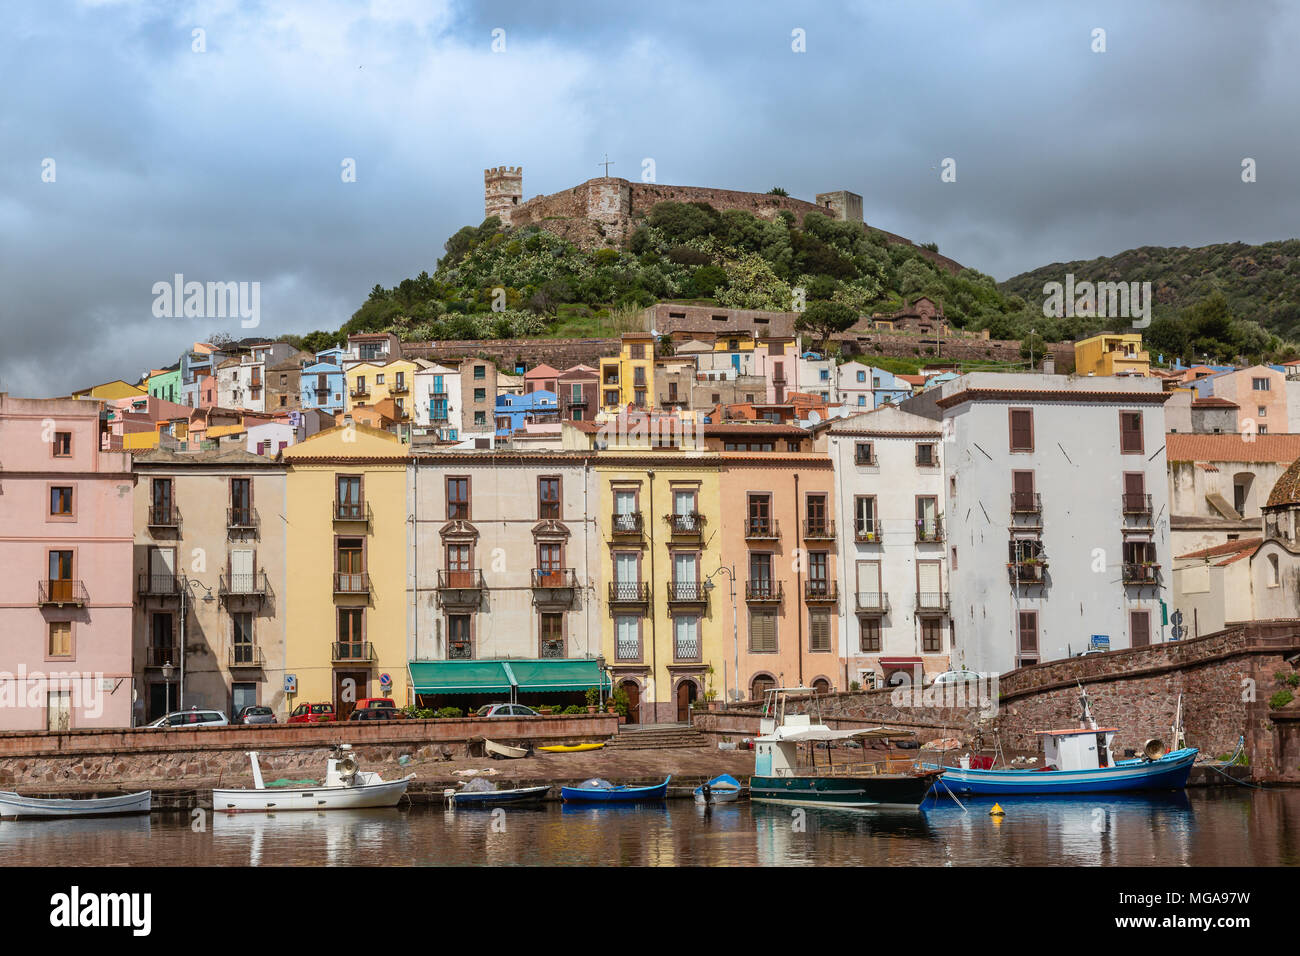 View of the medieval town of Bosa on the coast of Sardinia, Italy Stock Photo